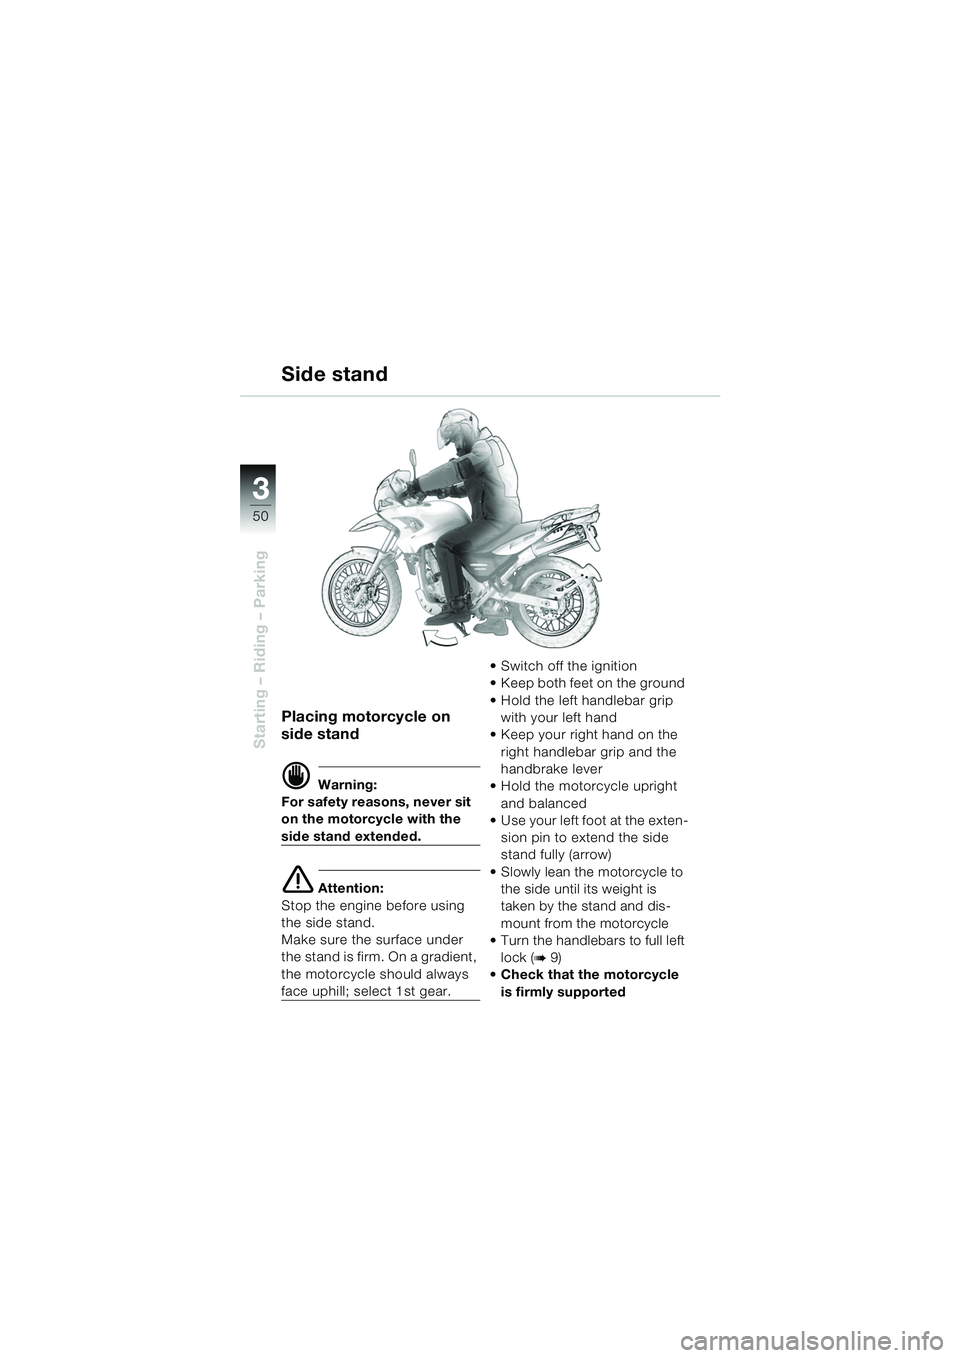 BMW MOTORRAD F 650 GS DAKAR 2003  Riders Manual (in English) 3
50
Starting – Riding – Parking
Placing motorcycle on 
side stand
d Warning:
For safety reasons, never sit 
on the motorcycle with the 
side stand extended.
e Attention:
Stop the engine before us